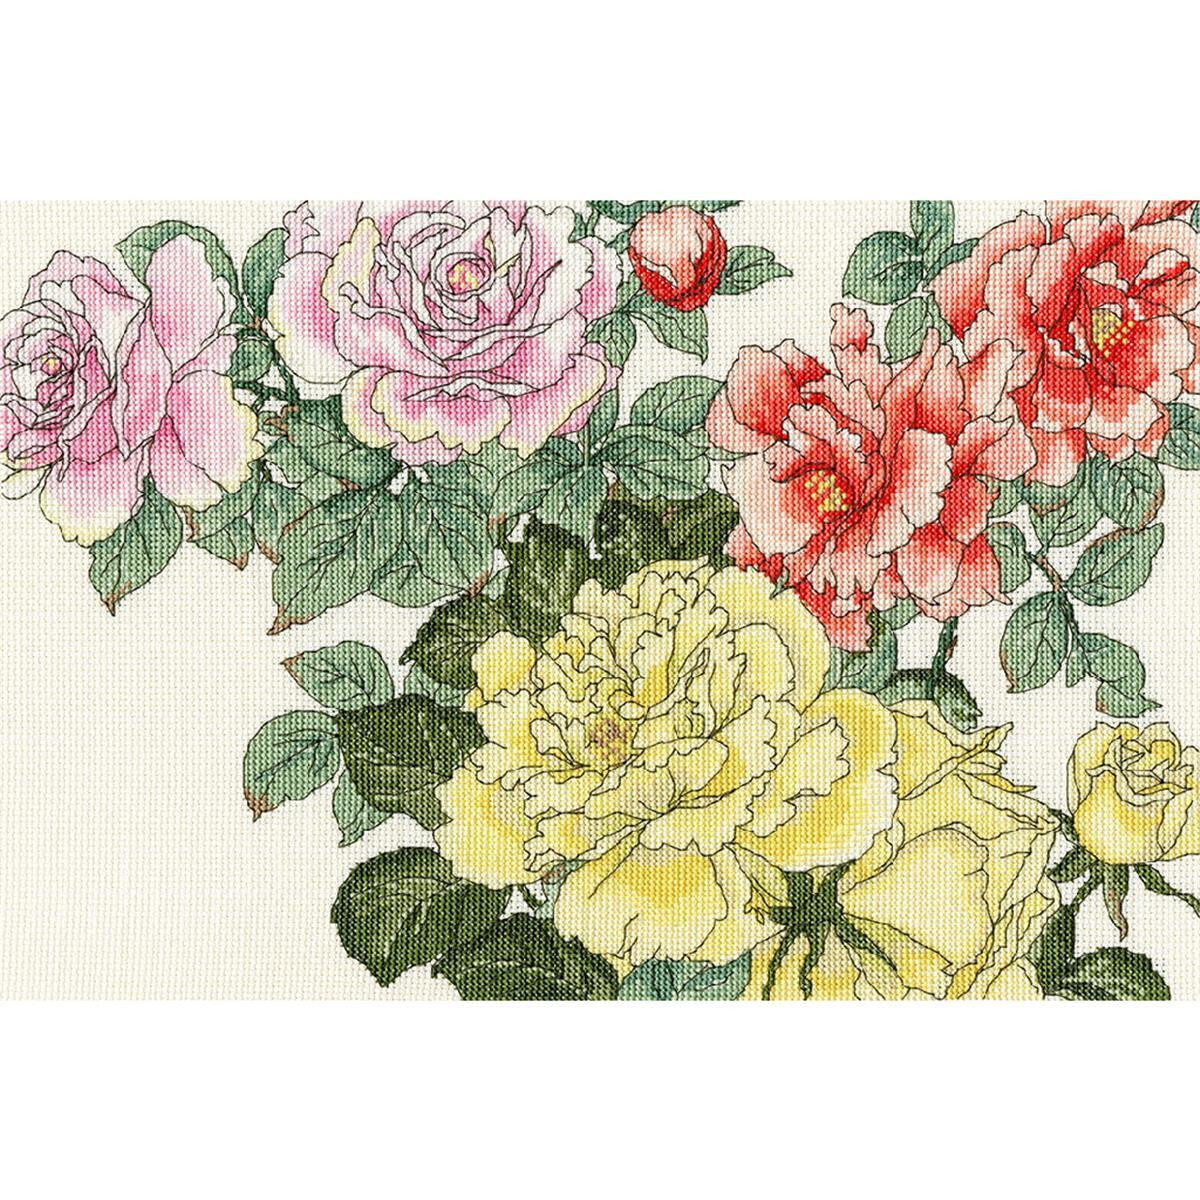 A detailed, intricate floral embroidery pack from Bothy...